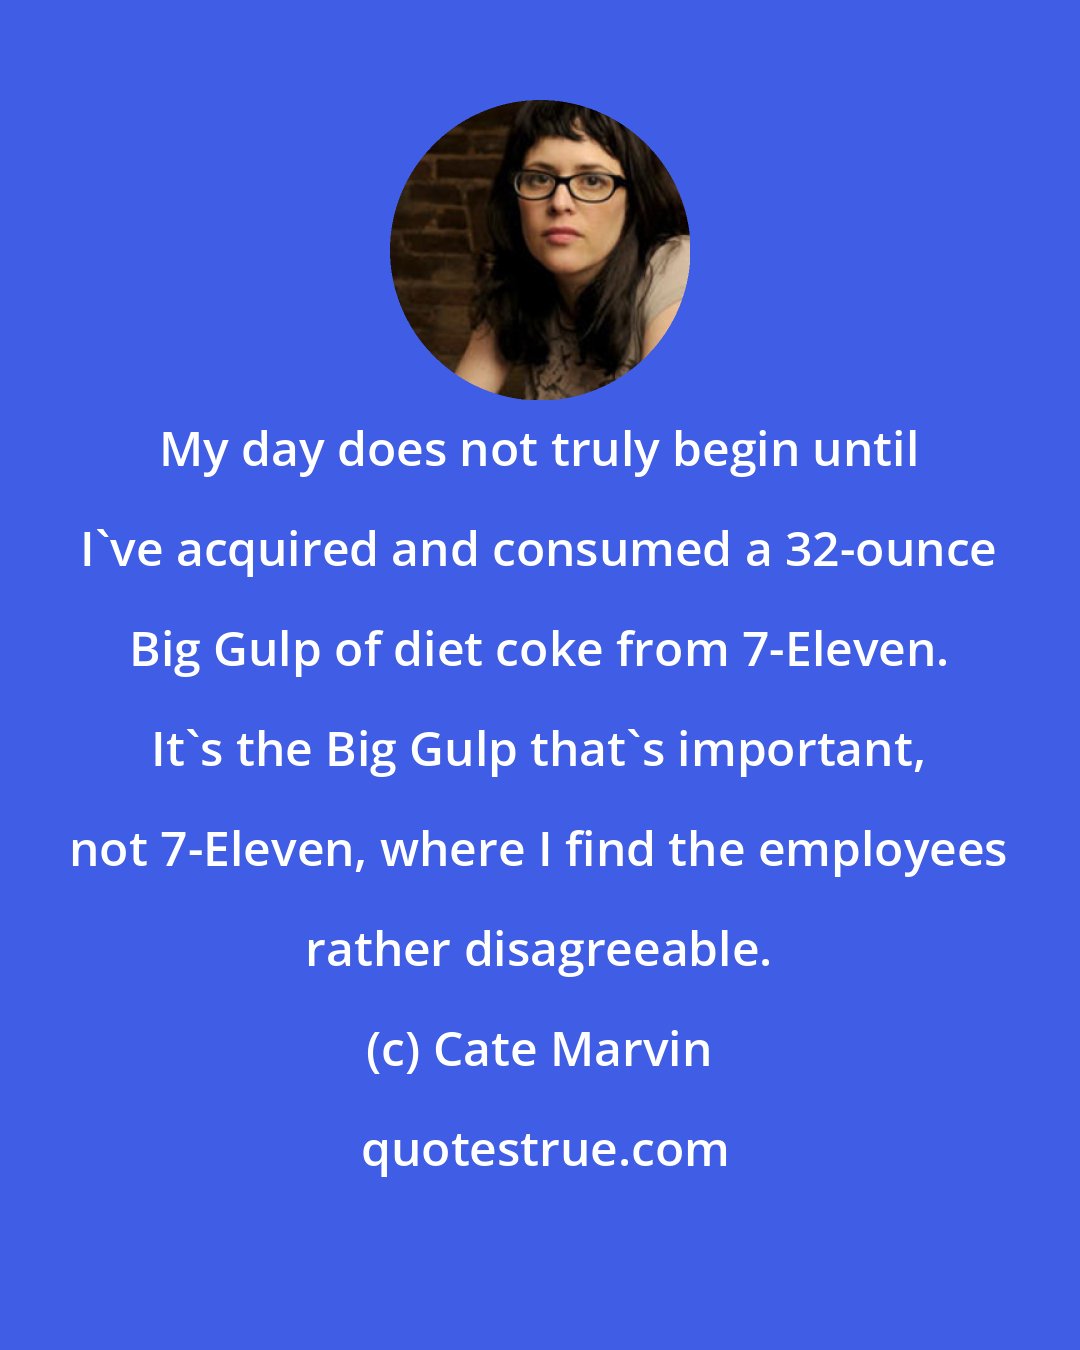 Cate Marvin: My day does not truly begin until I've acquired and consumed a 32-ounce Big Gulp of diet coke from 7-Eleven. It's the Big Gulp that's important, not 7-Eleven, where I find the employees rather disagreeable.